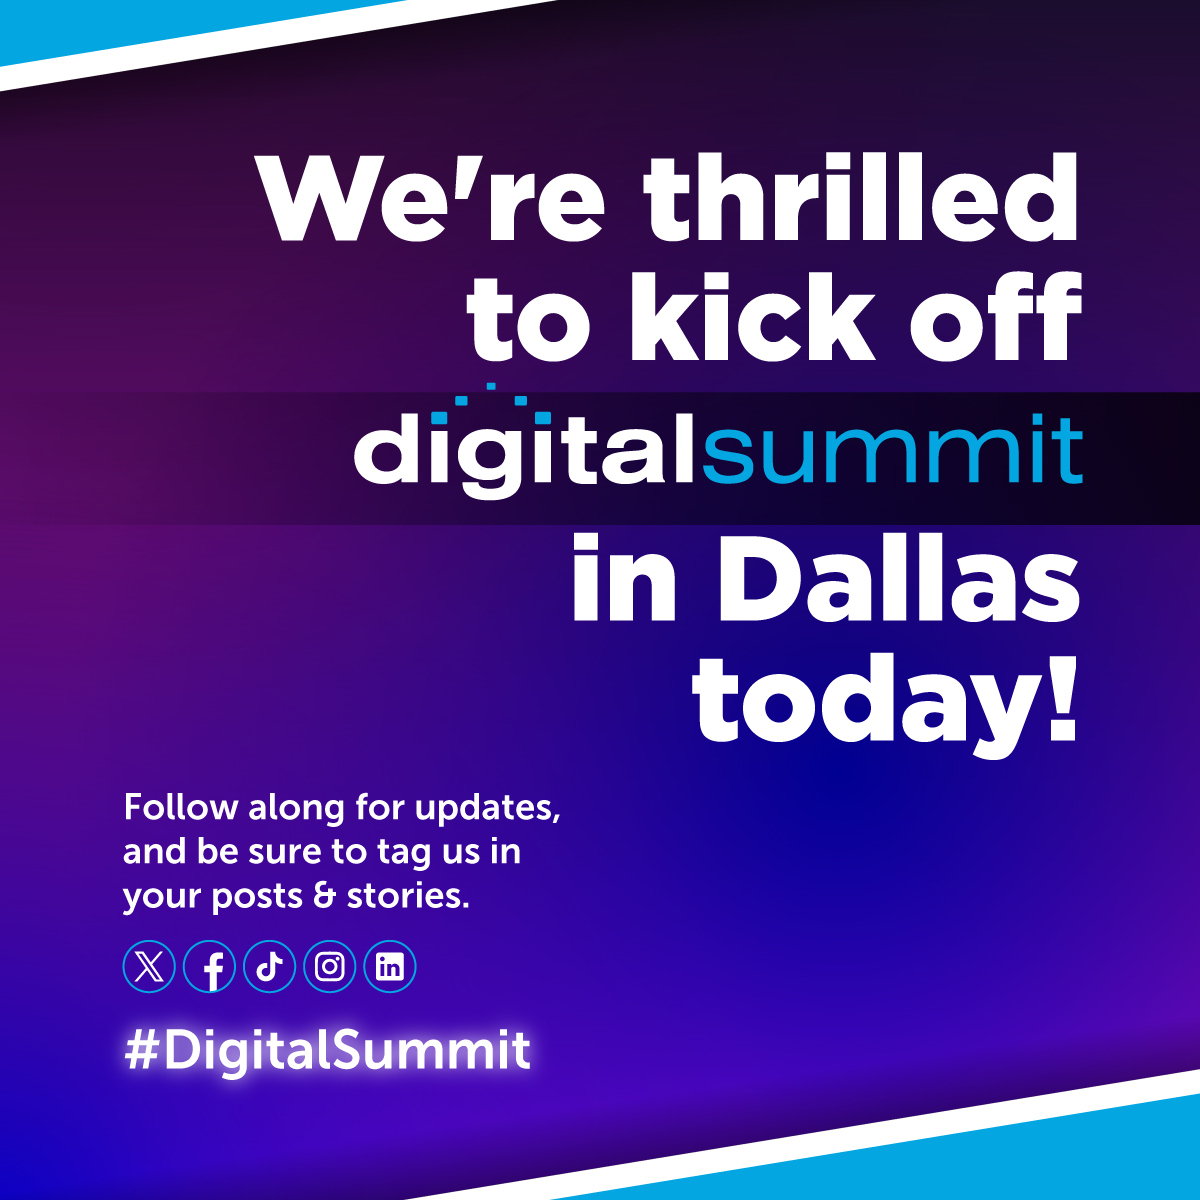 We're here for #DigitalSummit Dallas today & tomorrow! This is our last event of the year, and we are so excited to get things started. Follow along to get a glimpse of the action👌